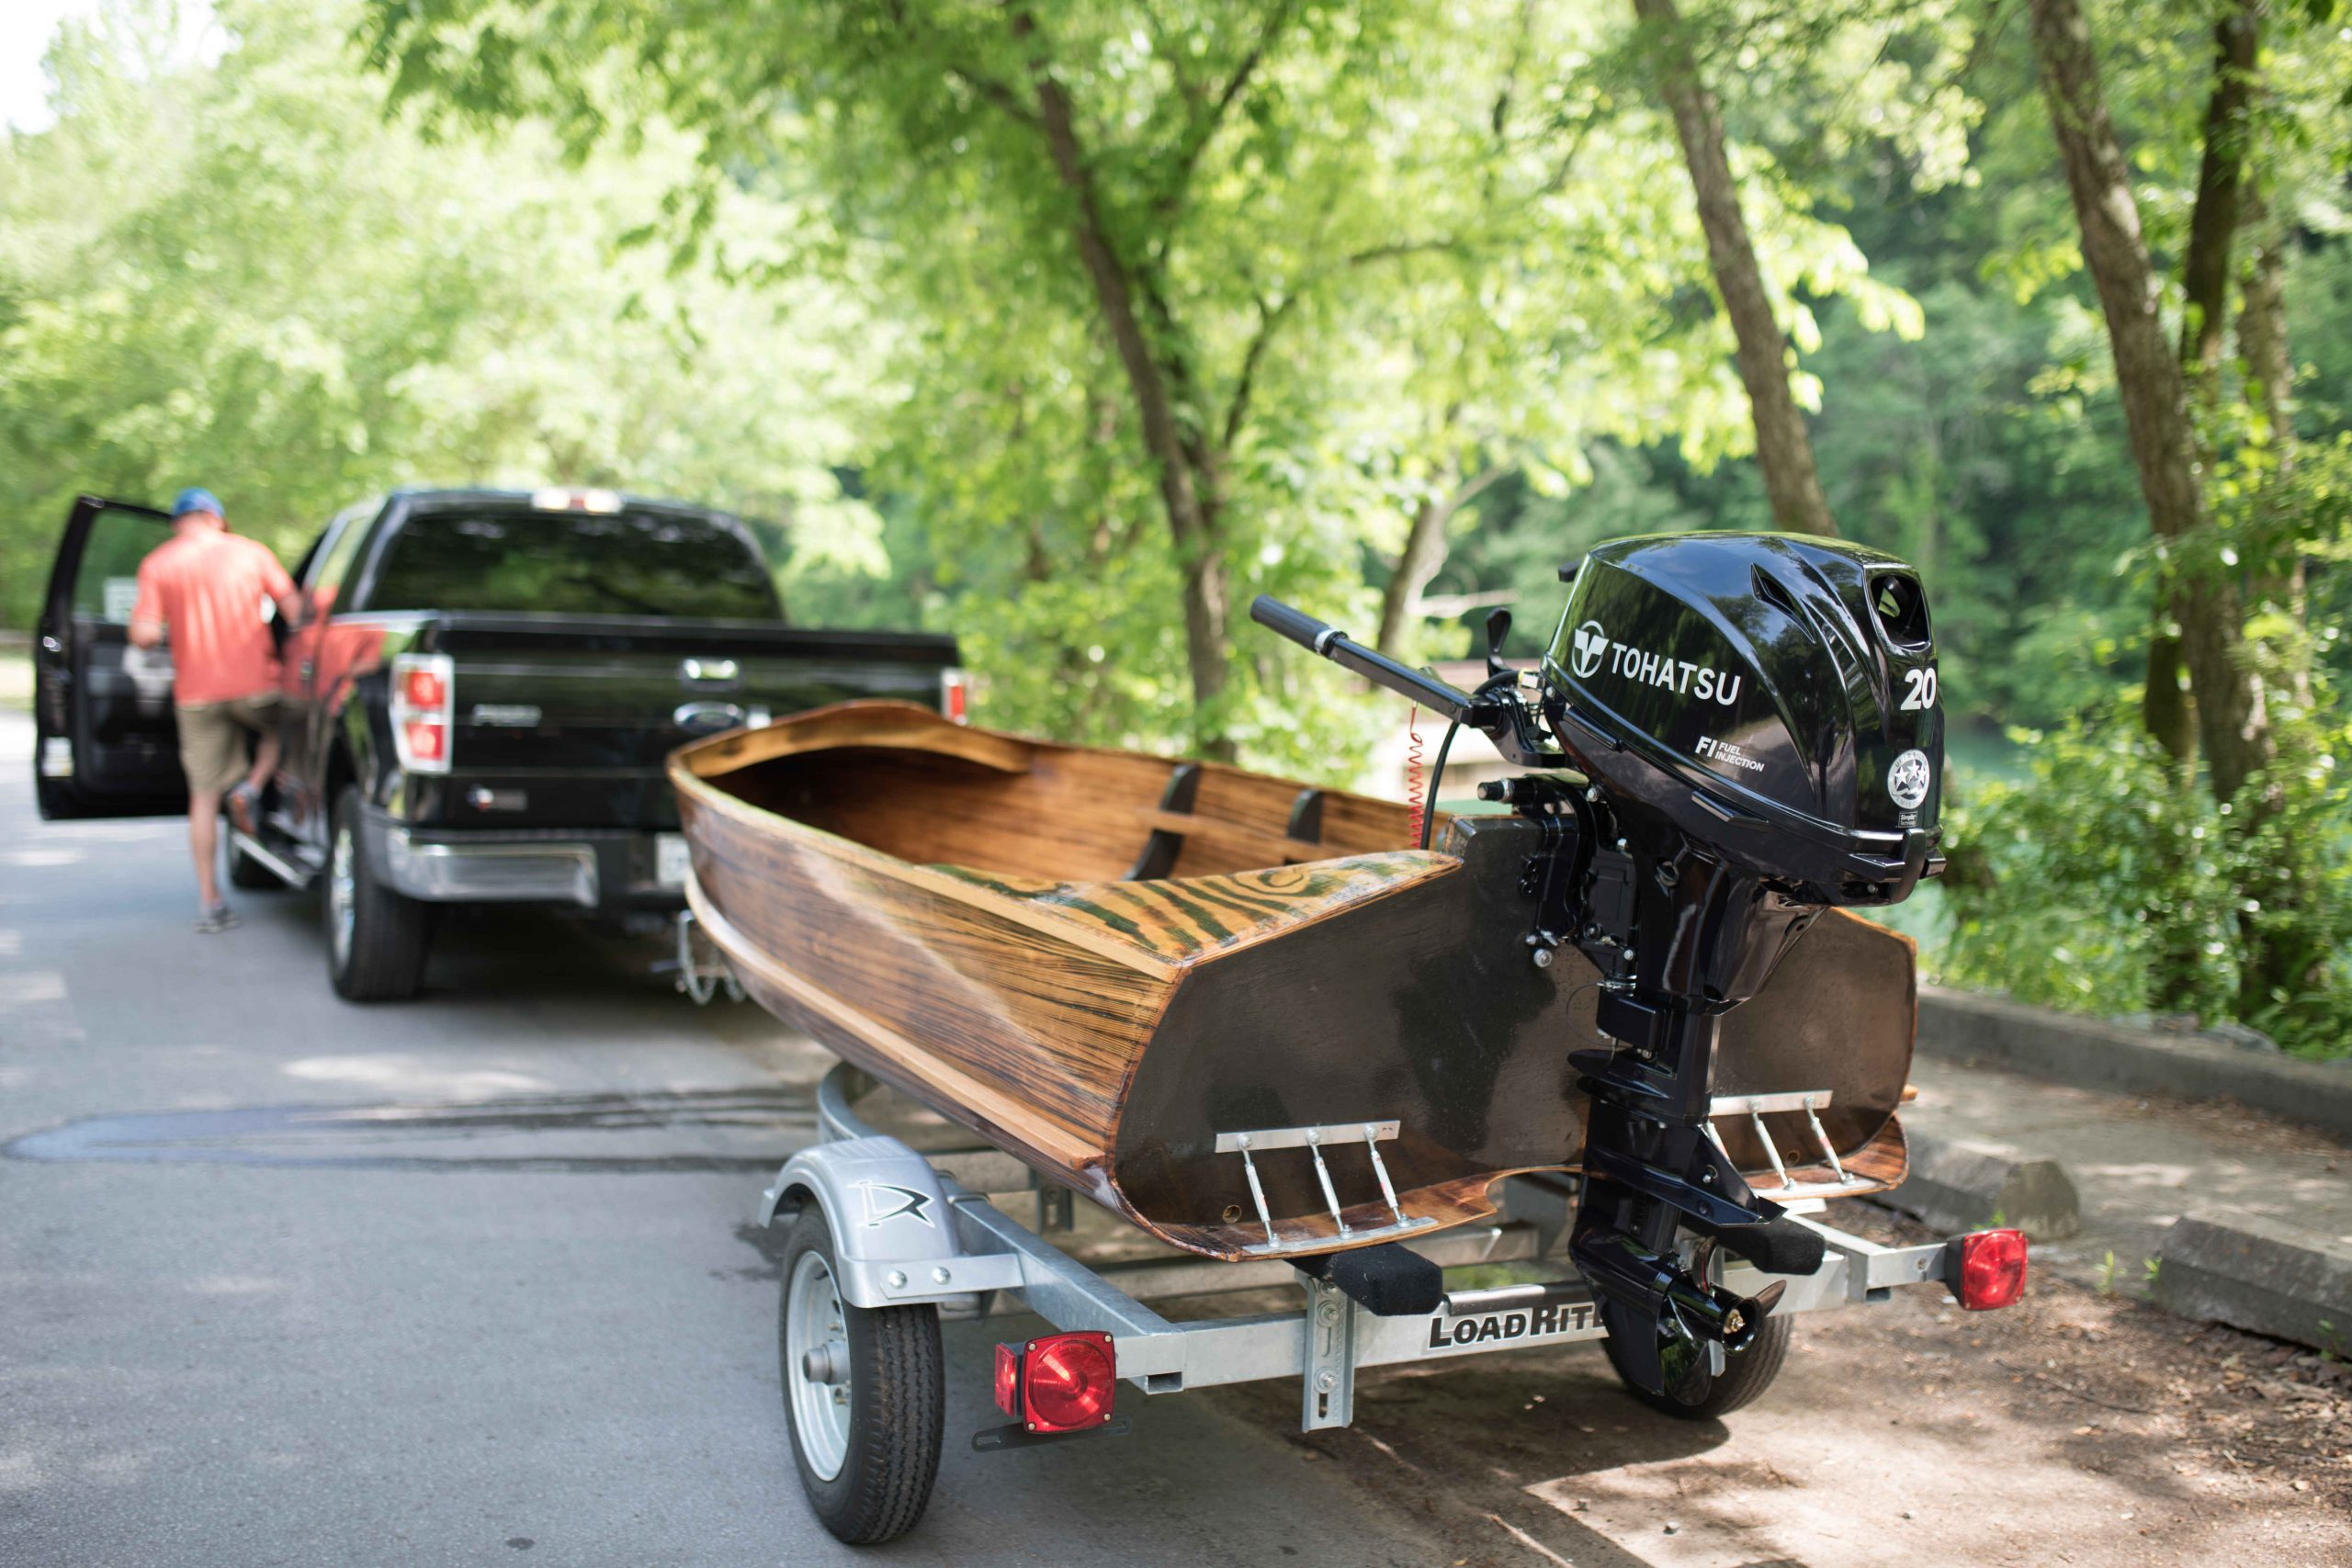 Tohatsu Outboard Motors: A Comprehensive Guide for Boating Enthusiasts